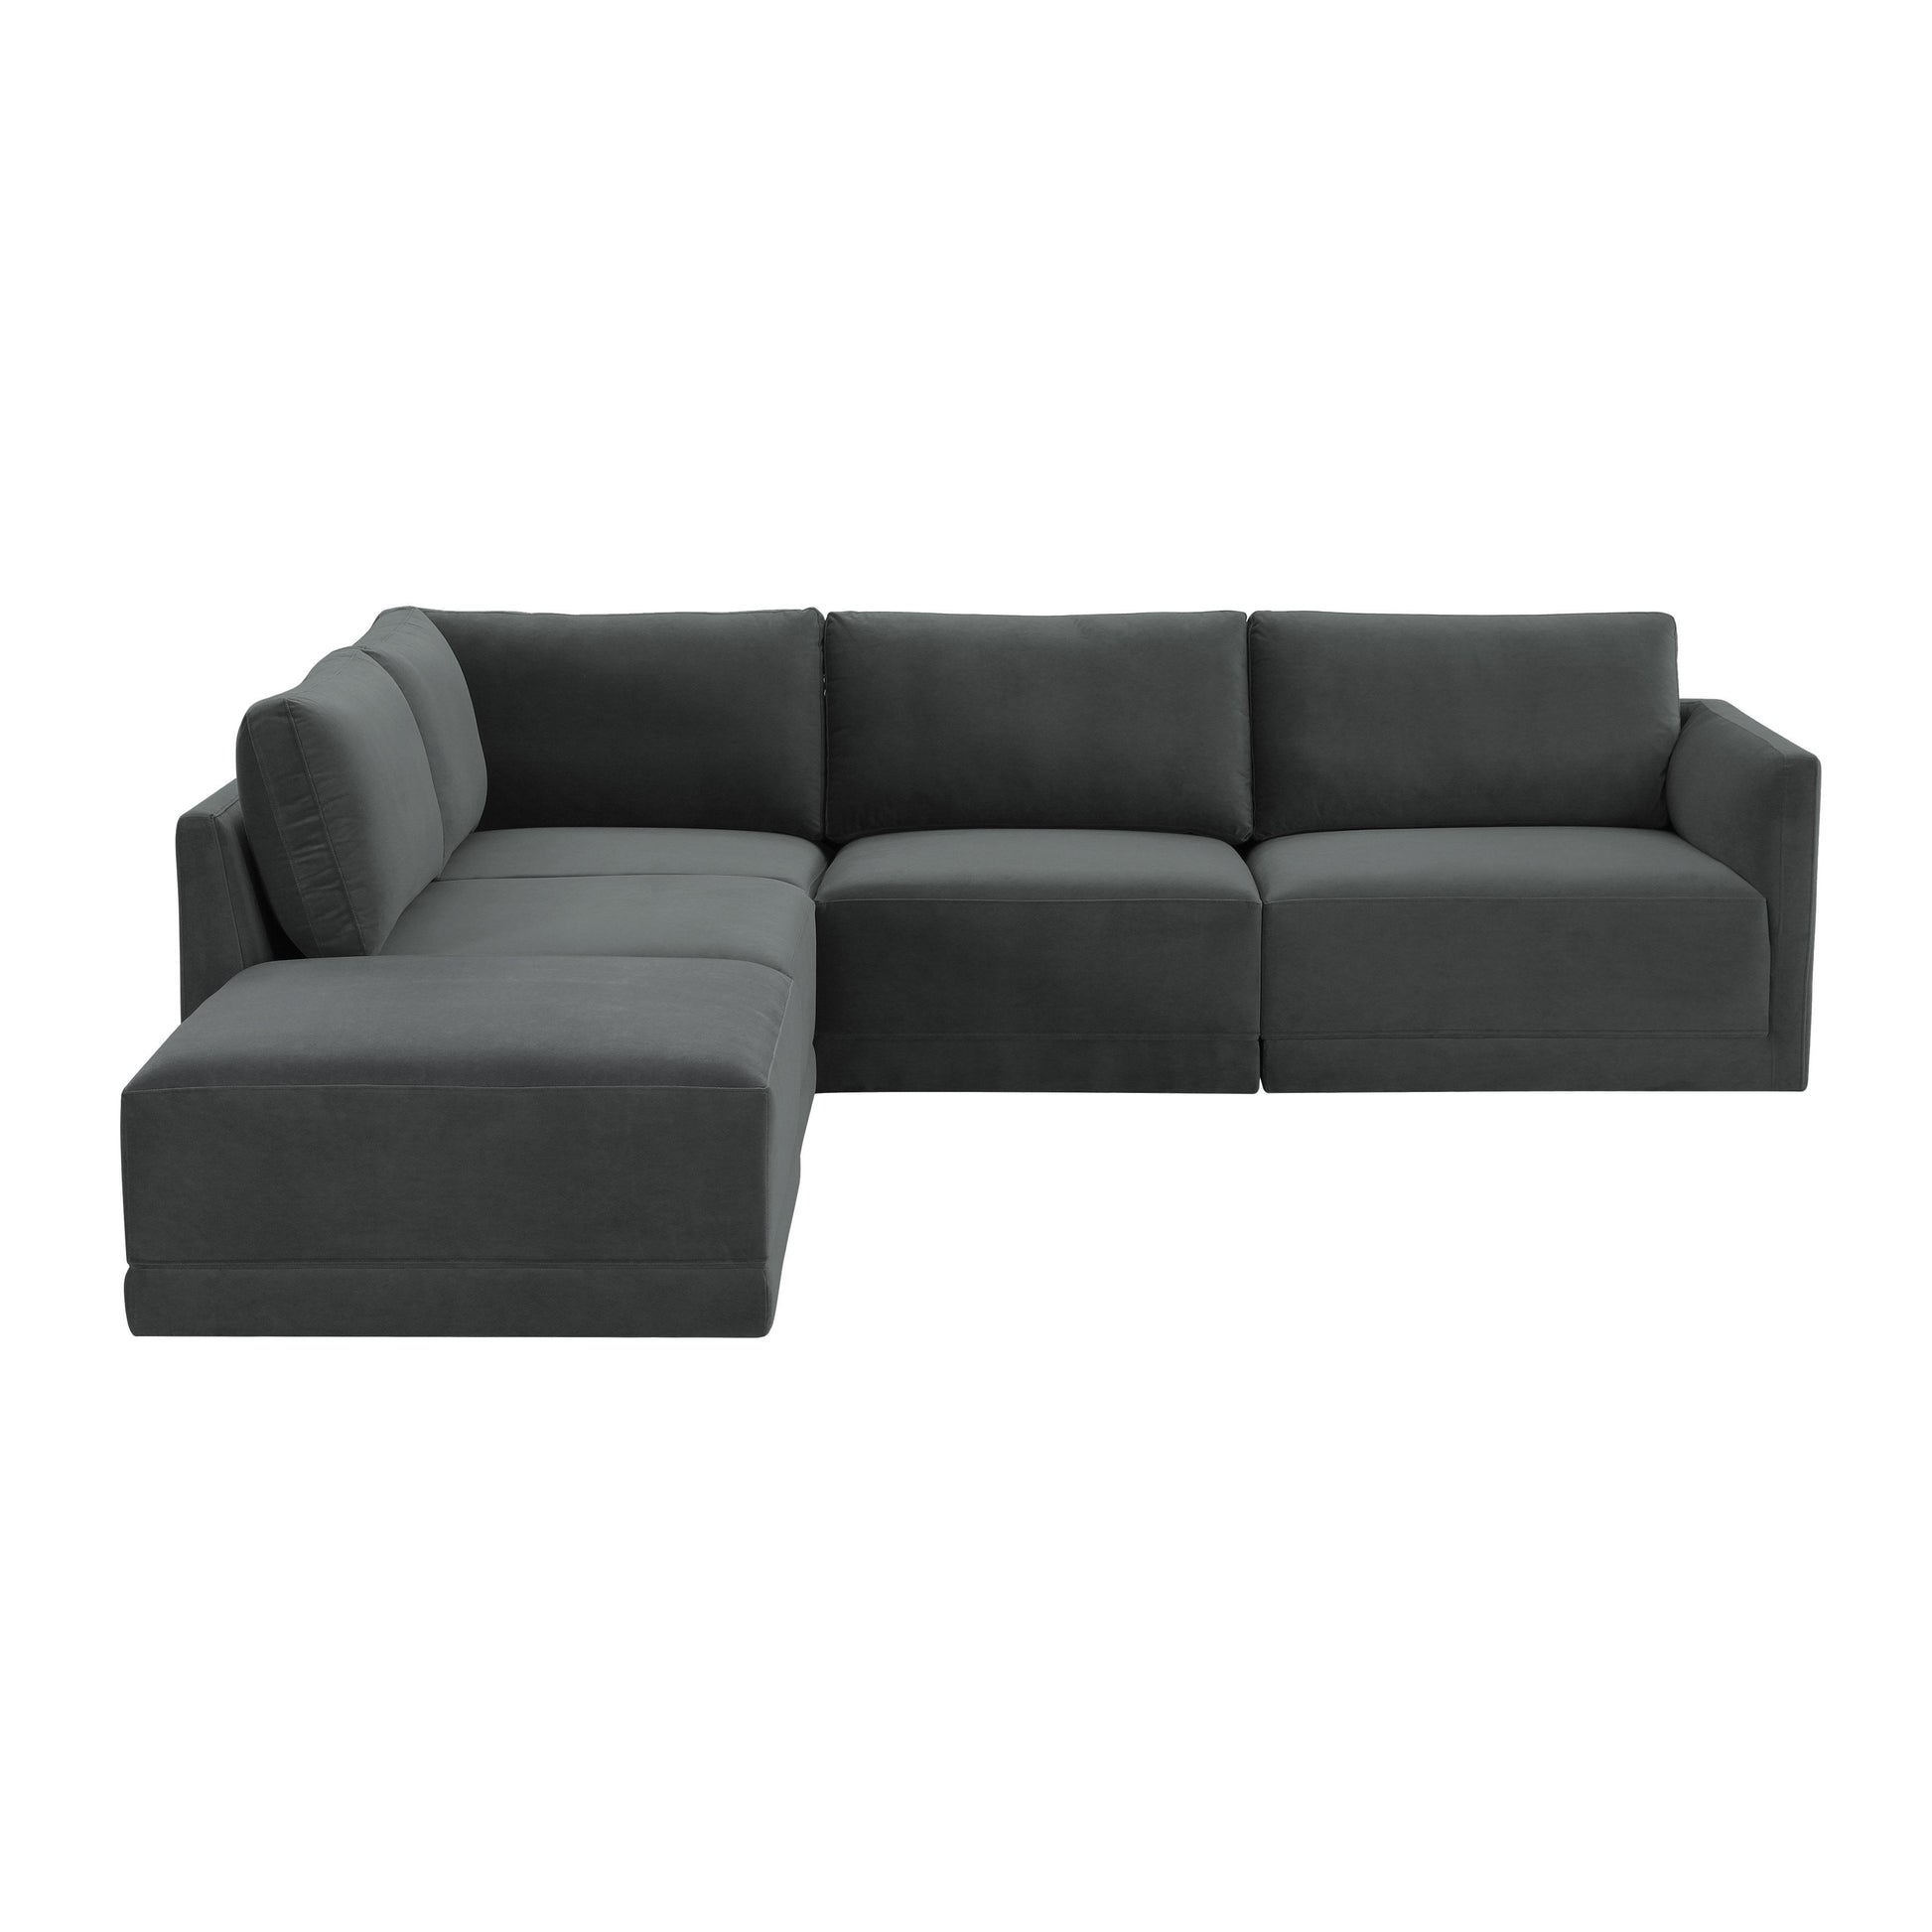 Tov Furniture Willow Charcoal Modular LAF Sectional